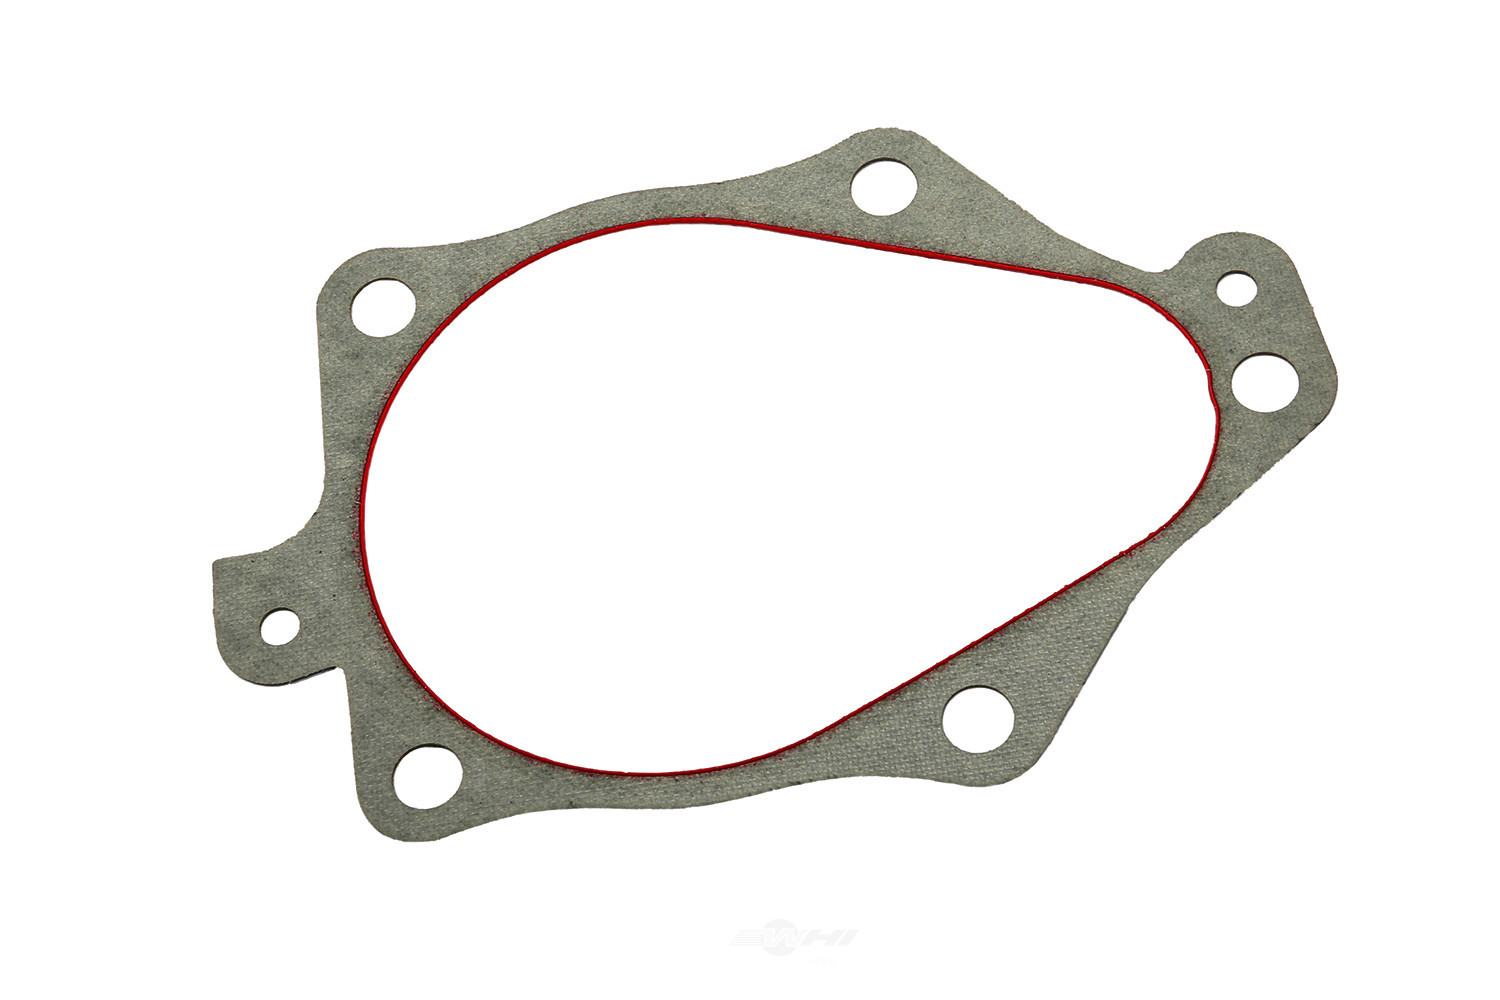 GM GENUINE PARTS - Drive Shaft CV Joint Gasket - GMP 15270970